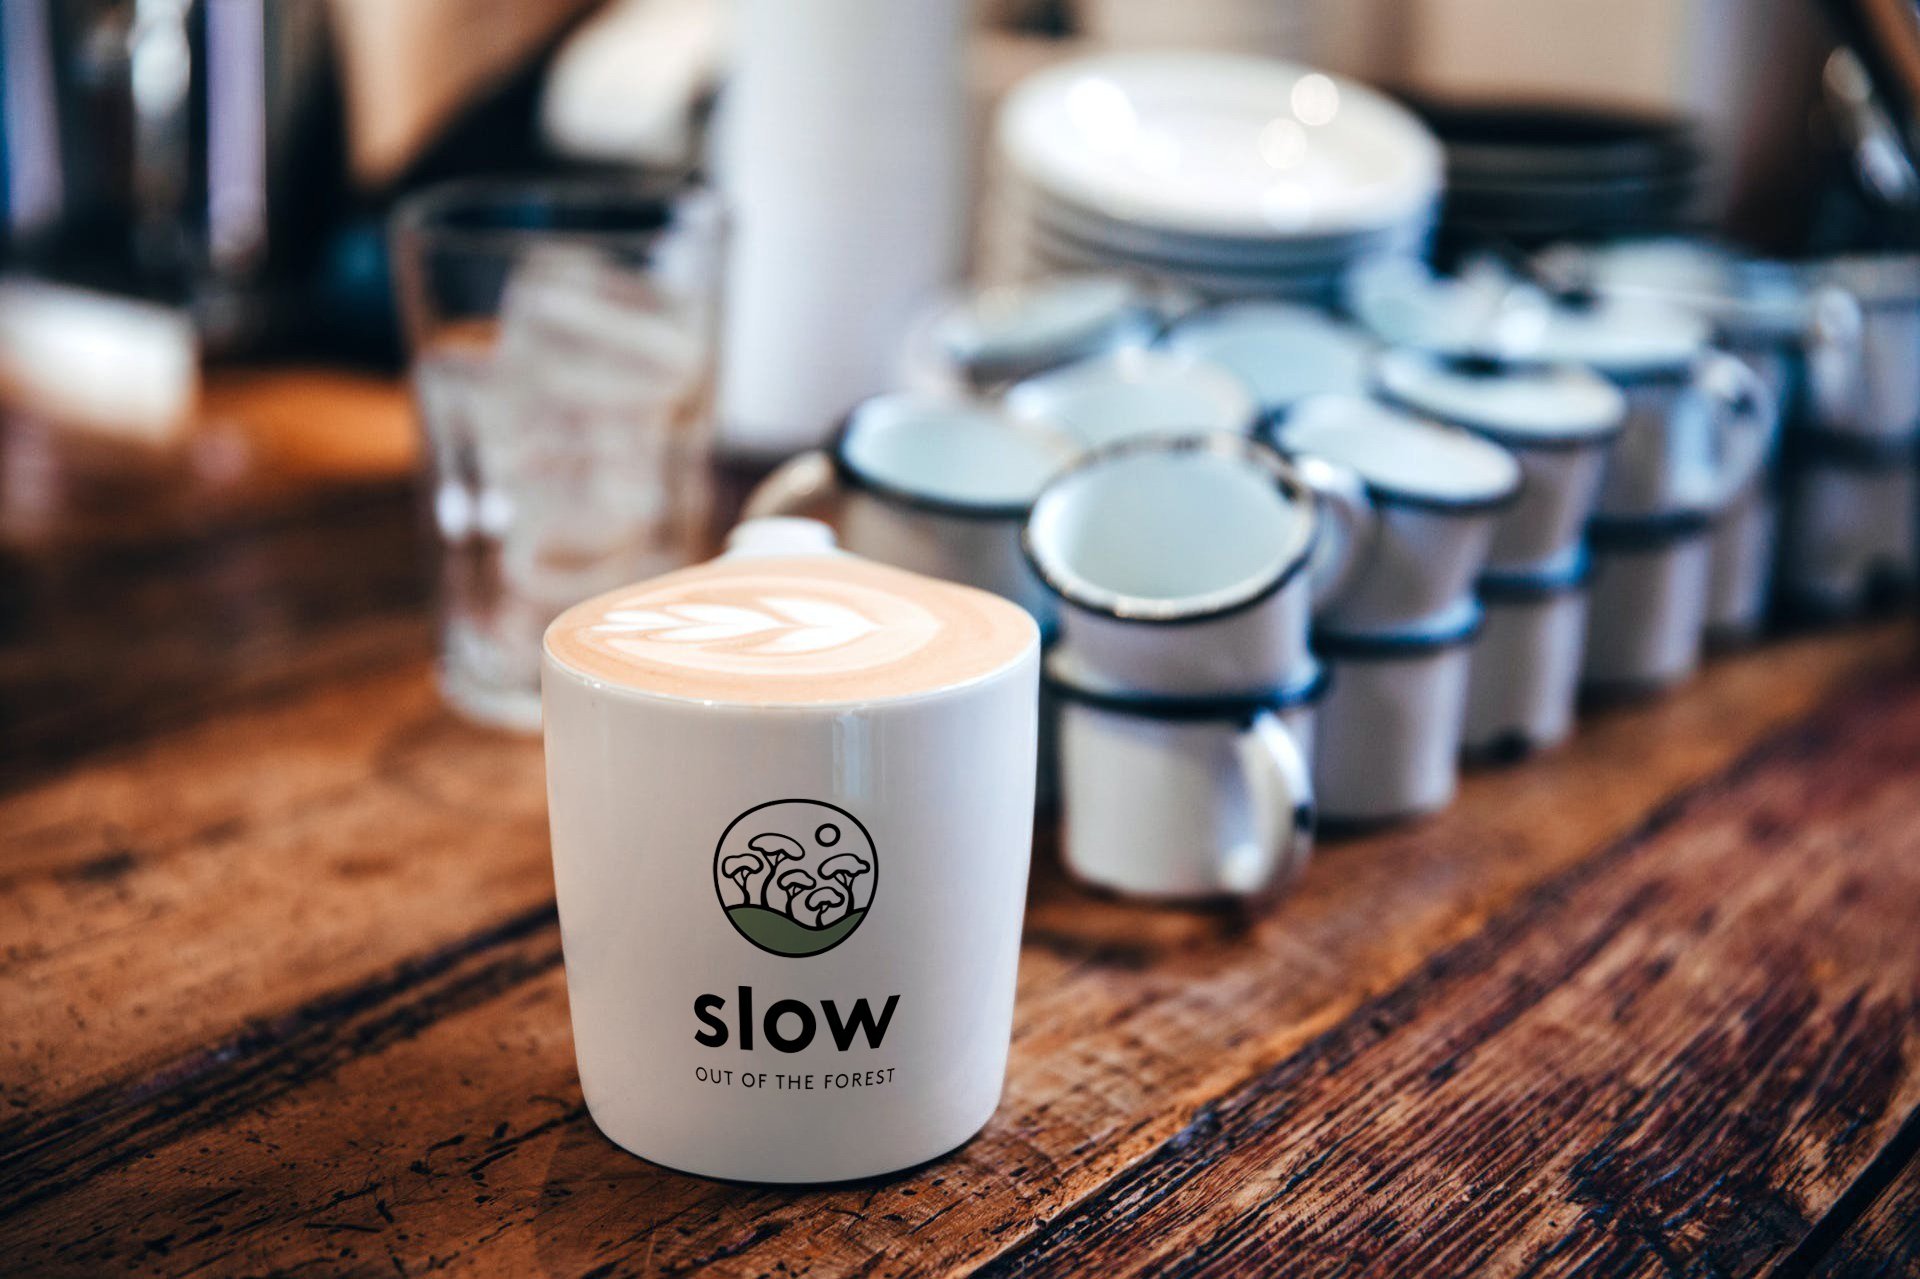 Slow Coffee has earned the European Union organic certification, ensuring our coffee is produced to EU organic standards by the original 37 farming families.